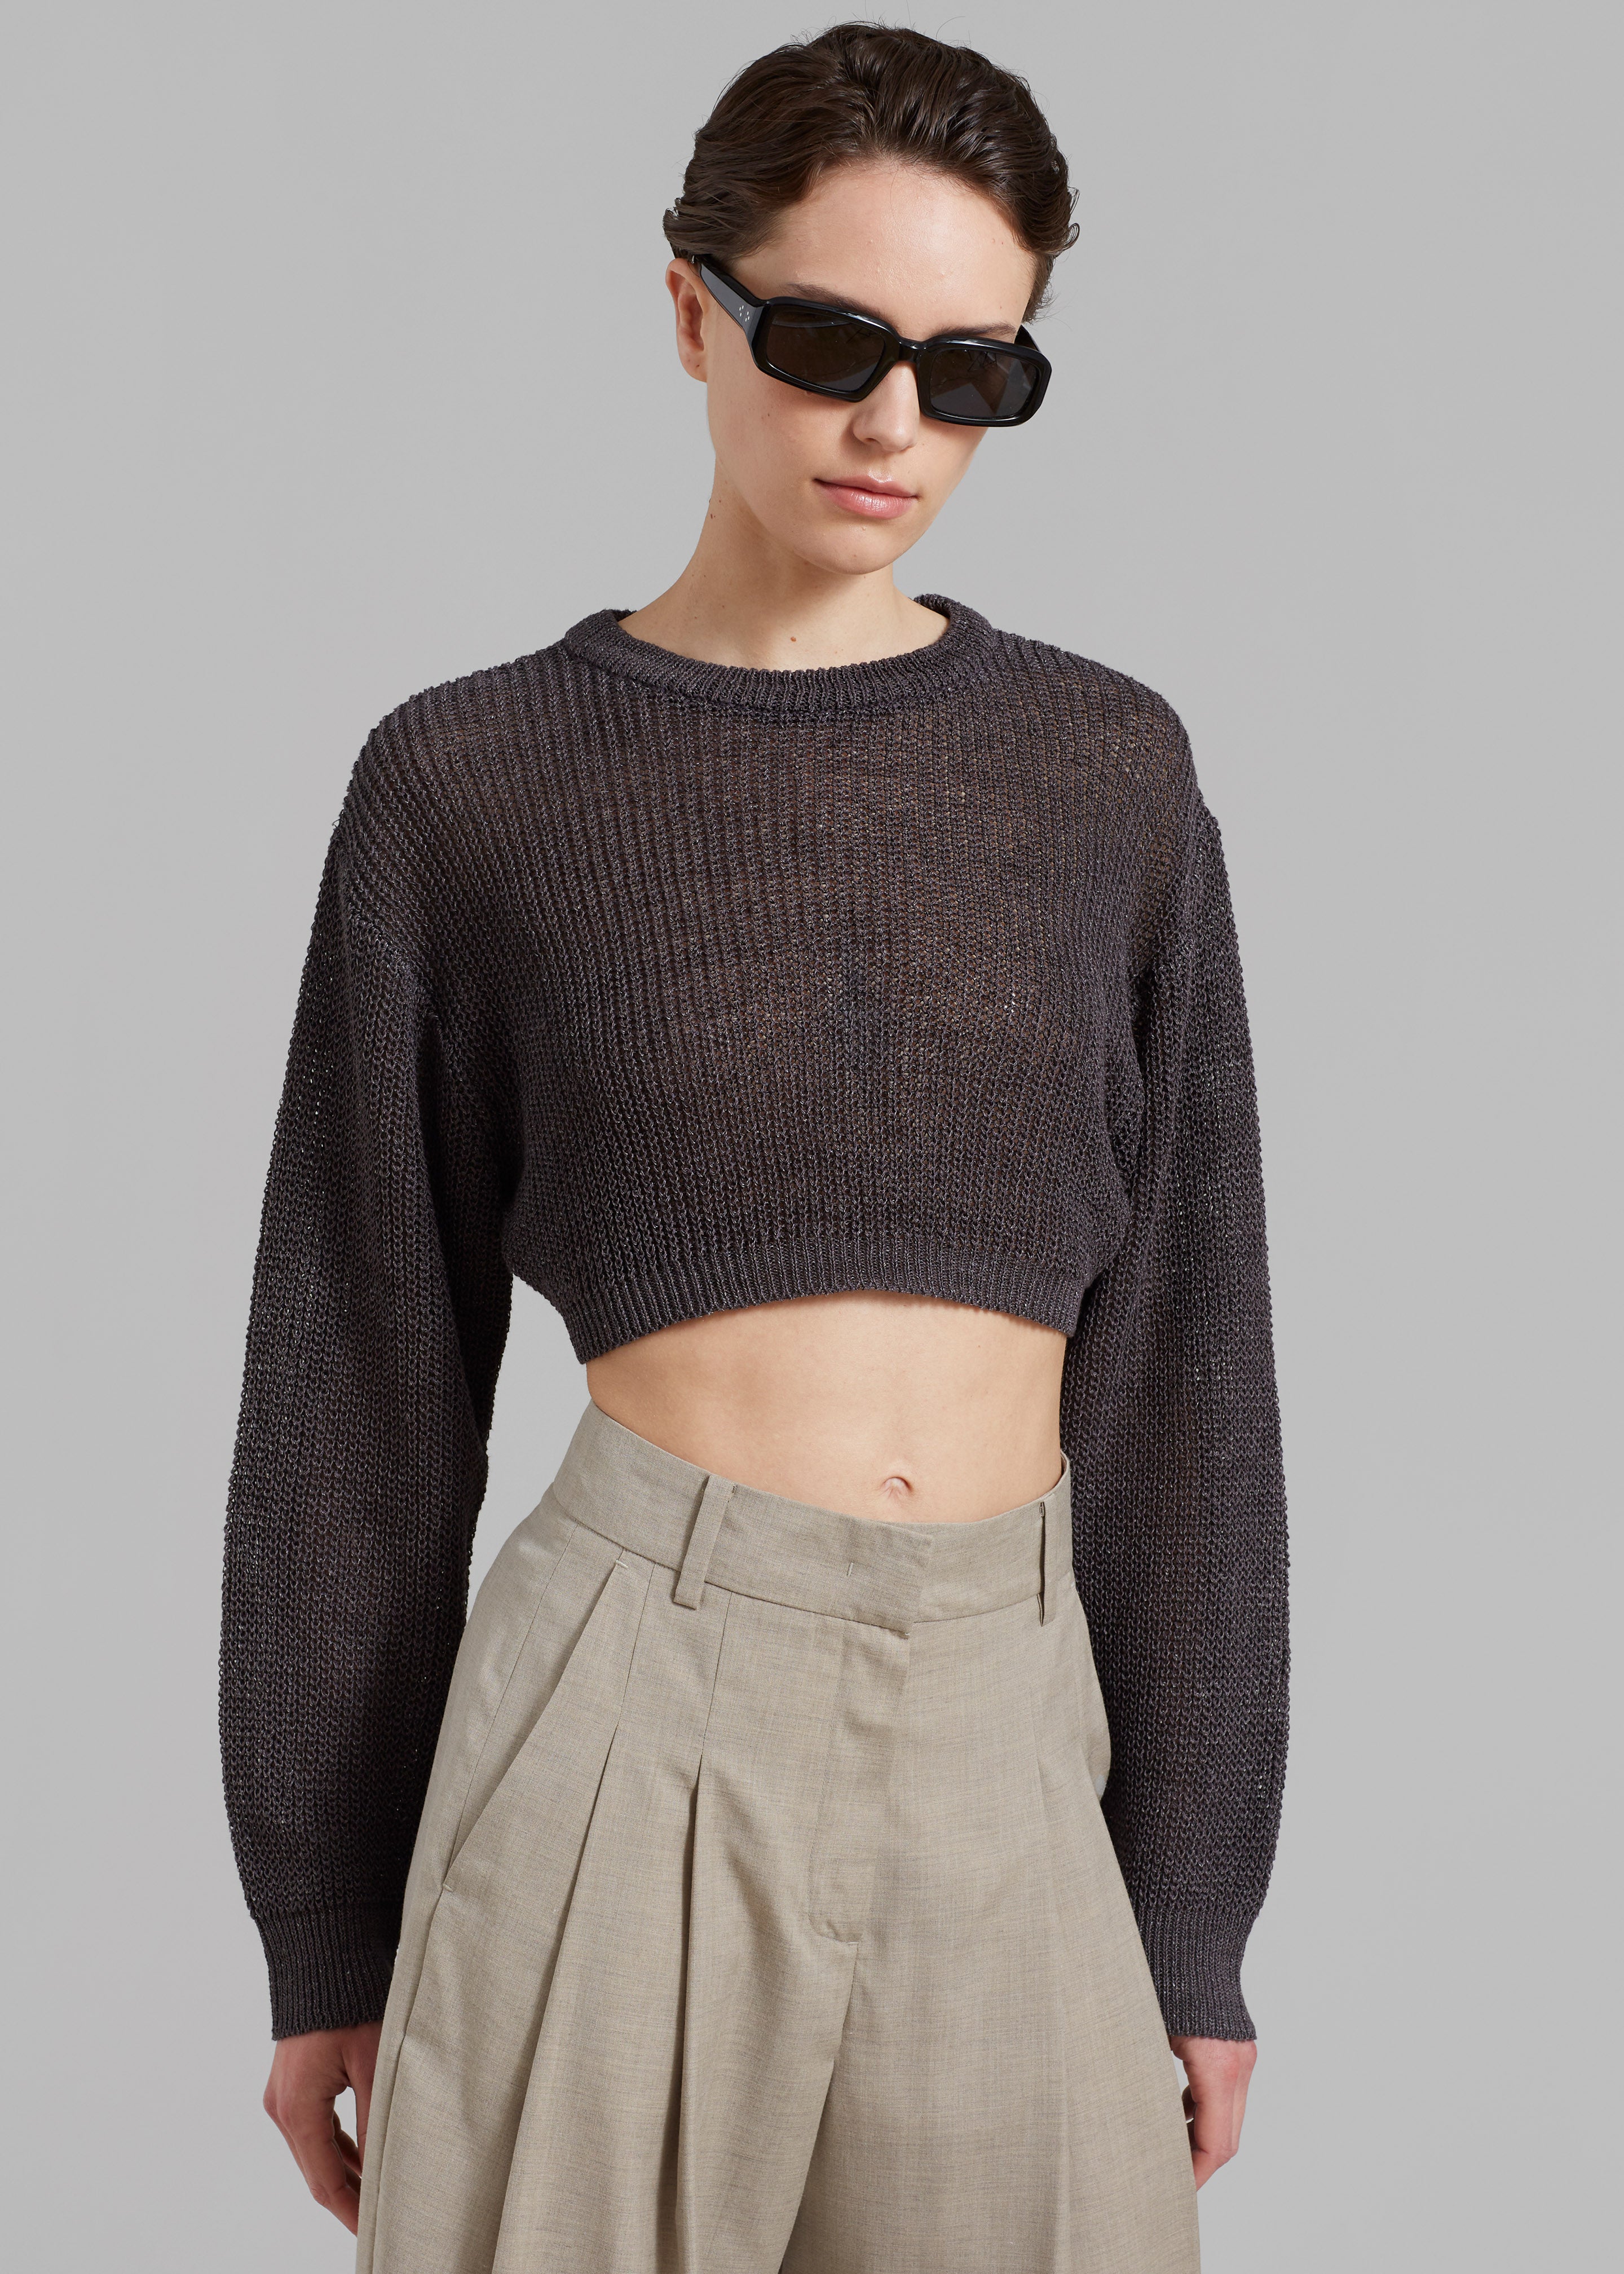 Abi Cropped Knit Top - Charcoal - 4